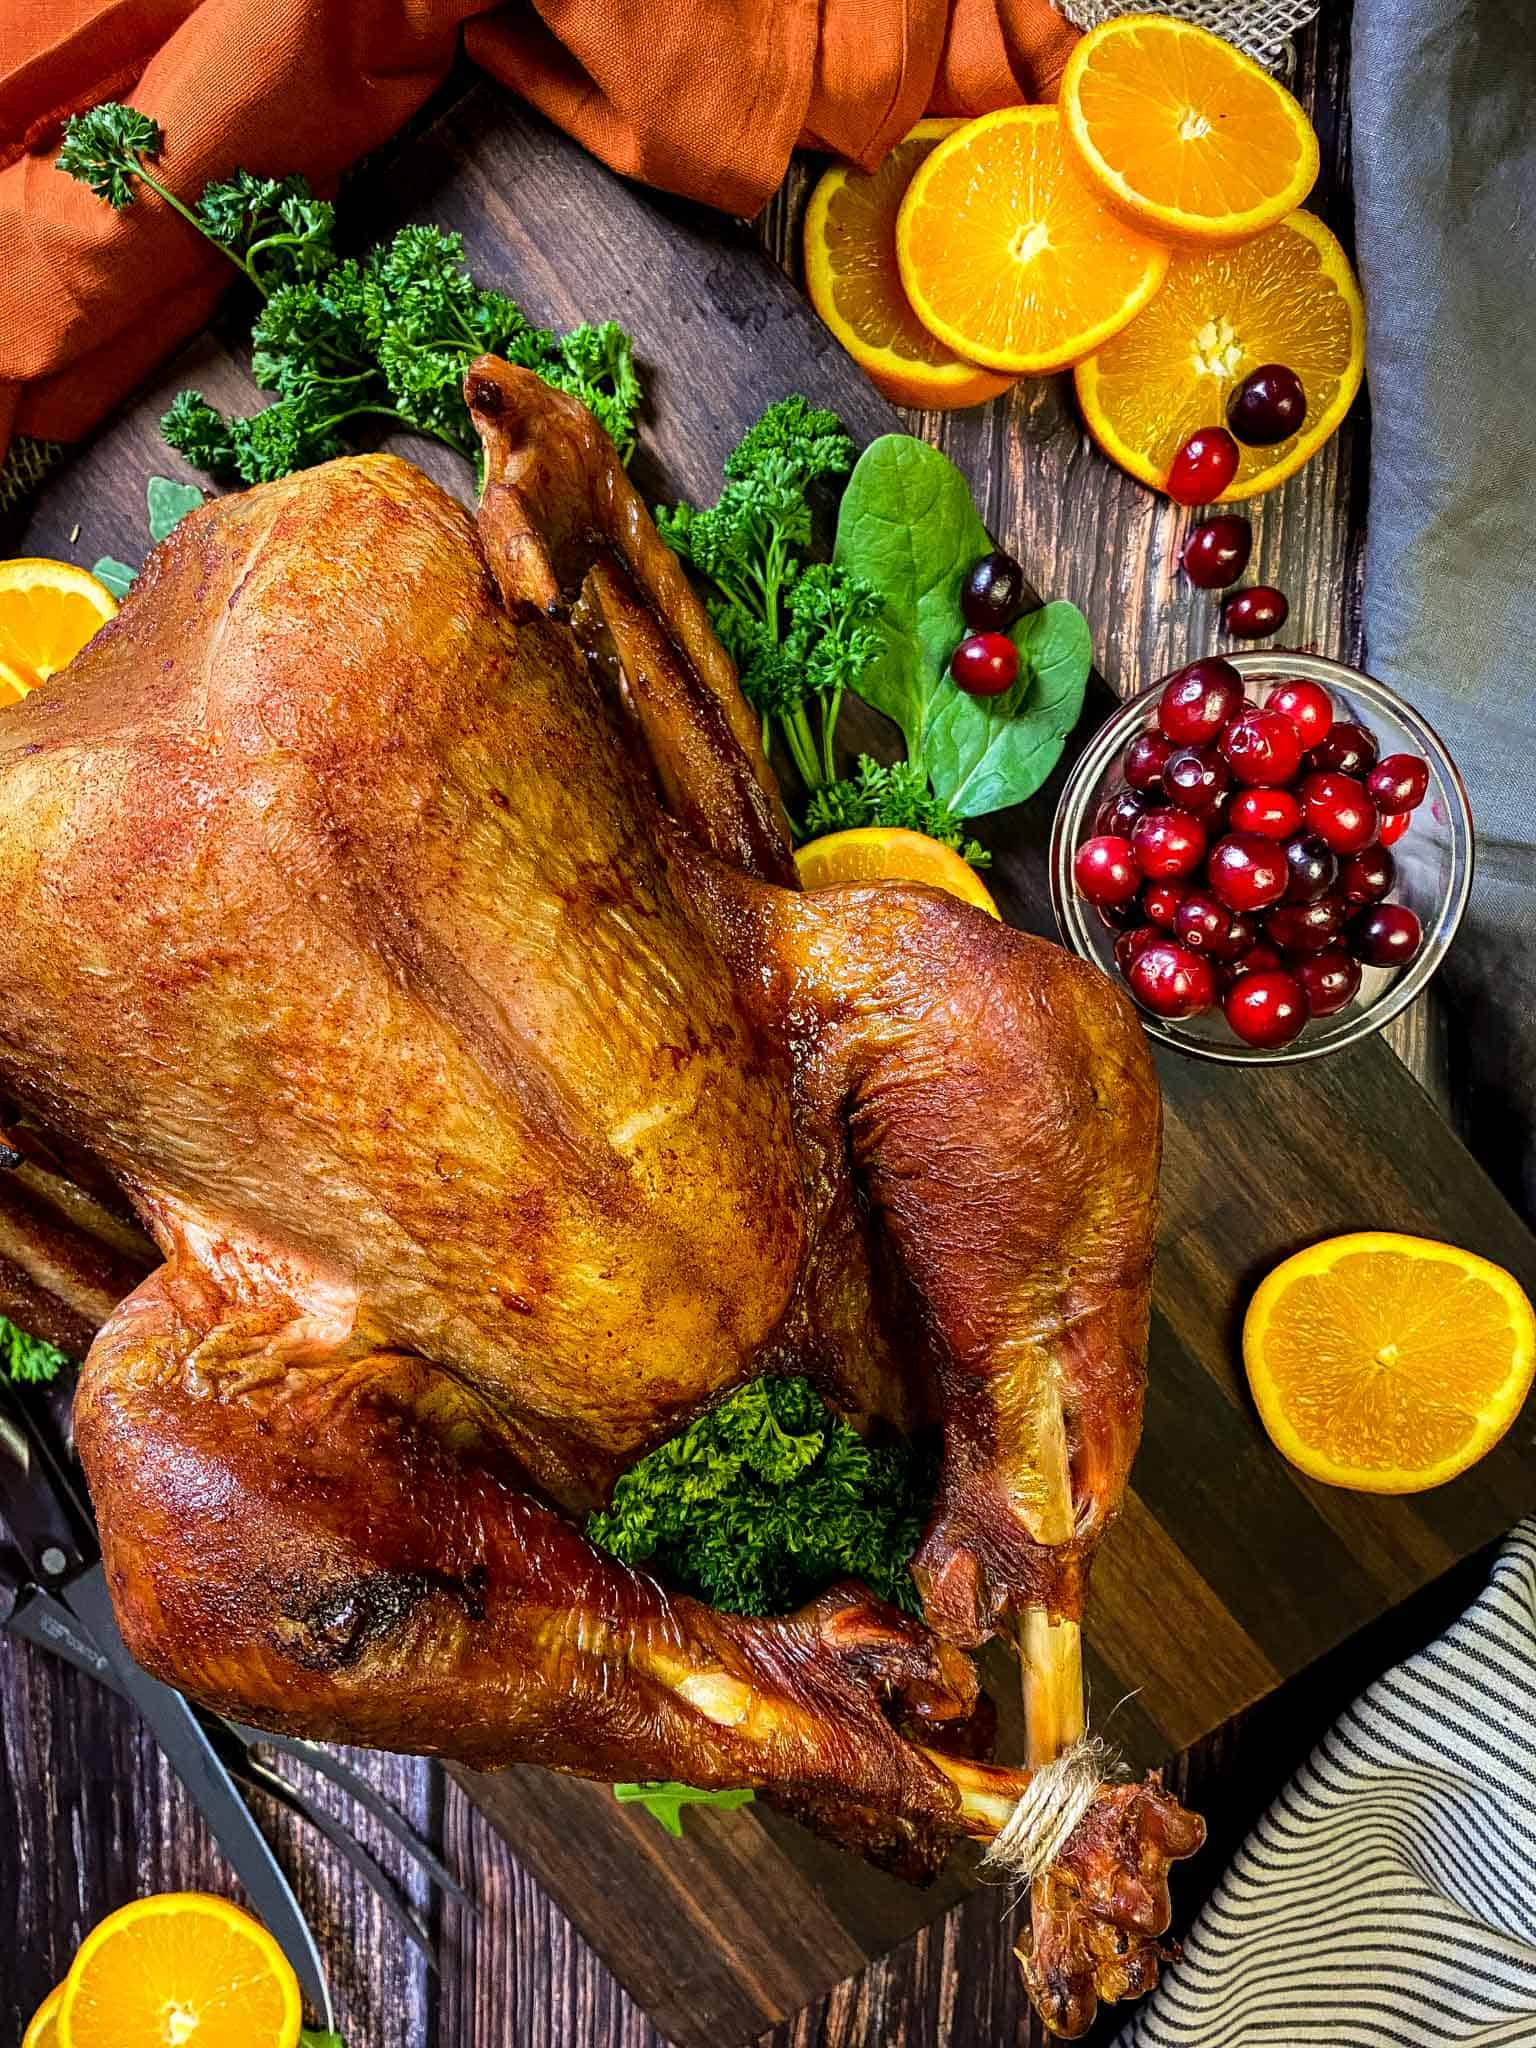 Juicy Smoked Turkey Recipe – Traeger, Pit Boss, or Other Pellet Grill